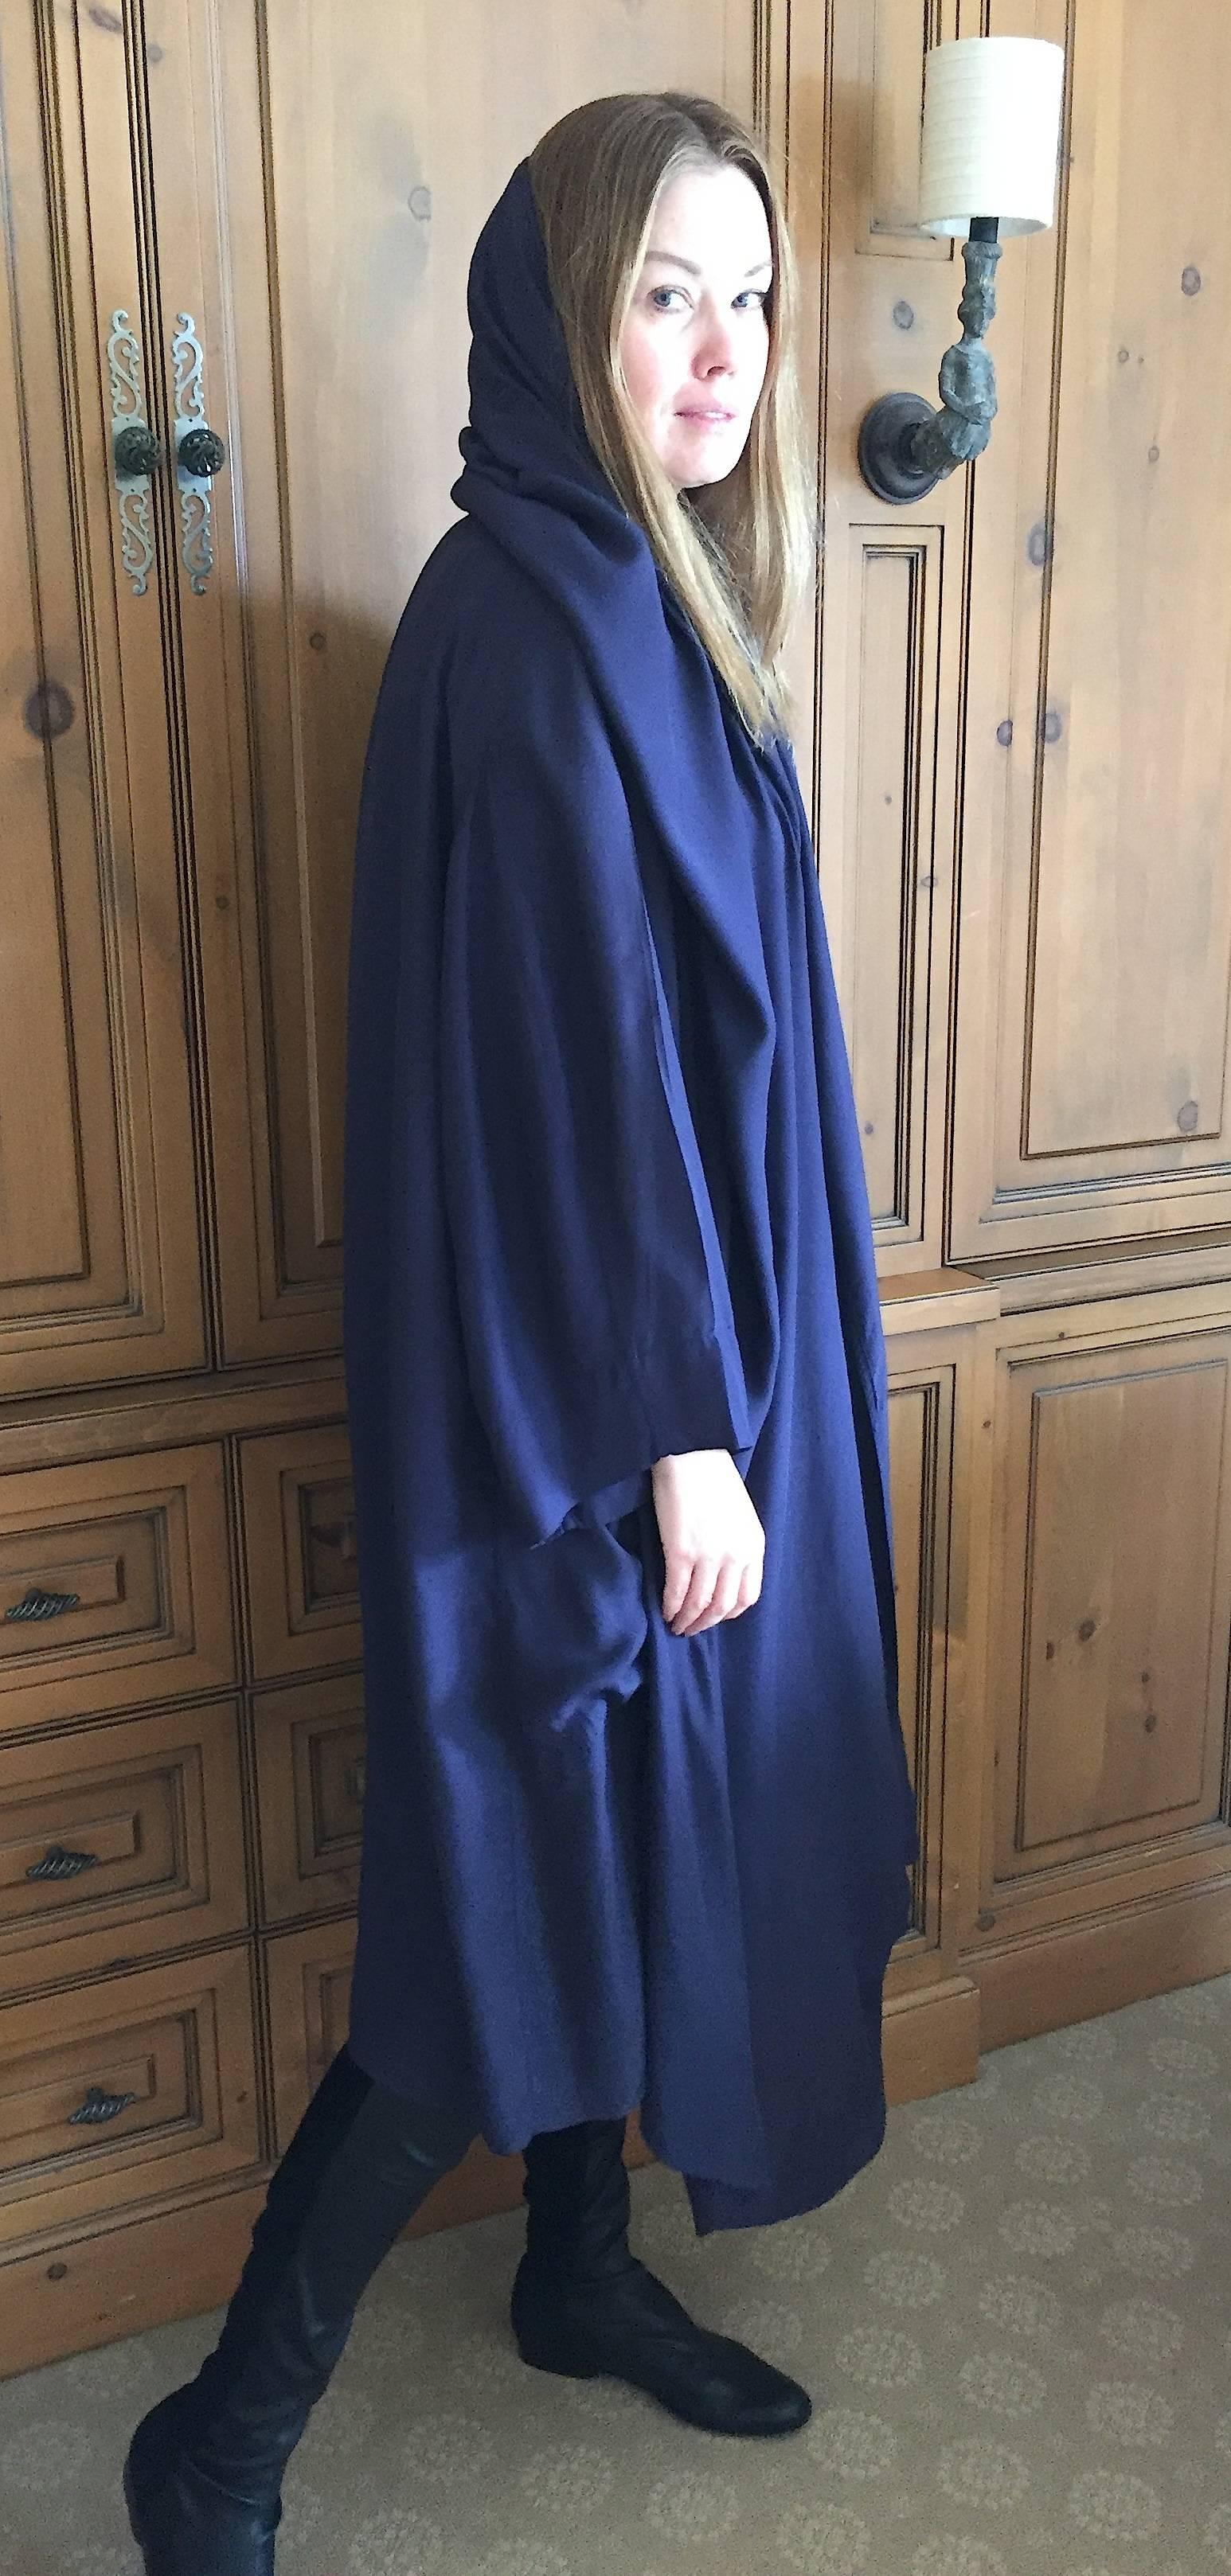 
Rare 1980's Azzedine Alaia hooded coat.
 In the 1980's Alaia was known for dressing Grace Jones, 
who loved to wear his hooded coats and dresses.
It is also unusual that it is so loose fitting, it complements his dresses.
It has a very